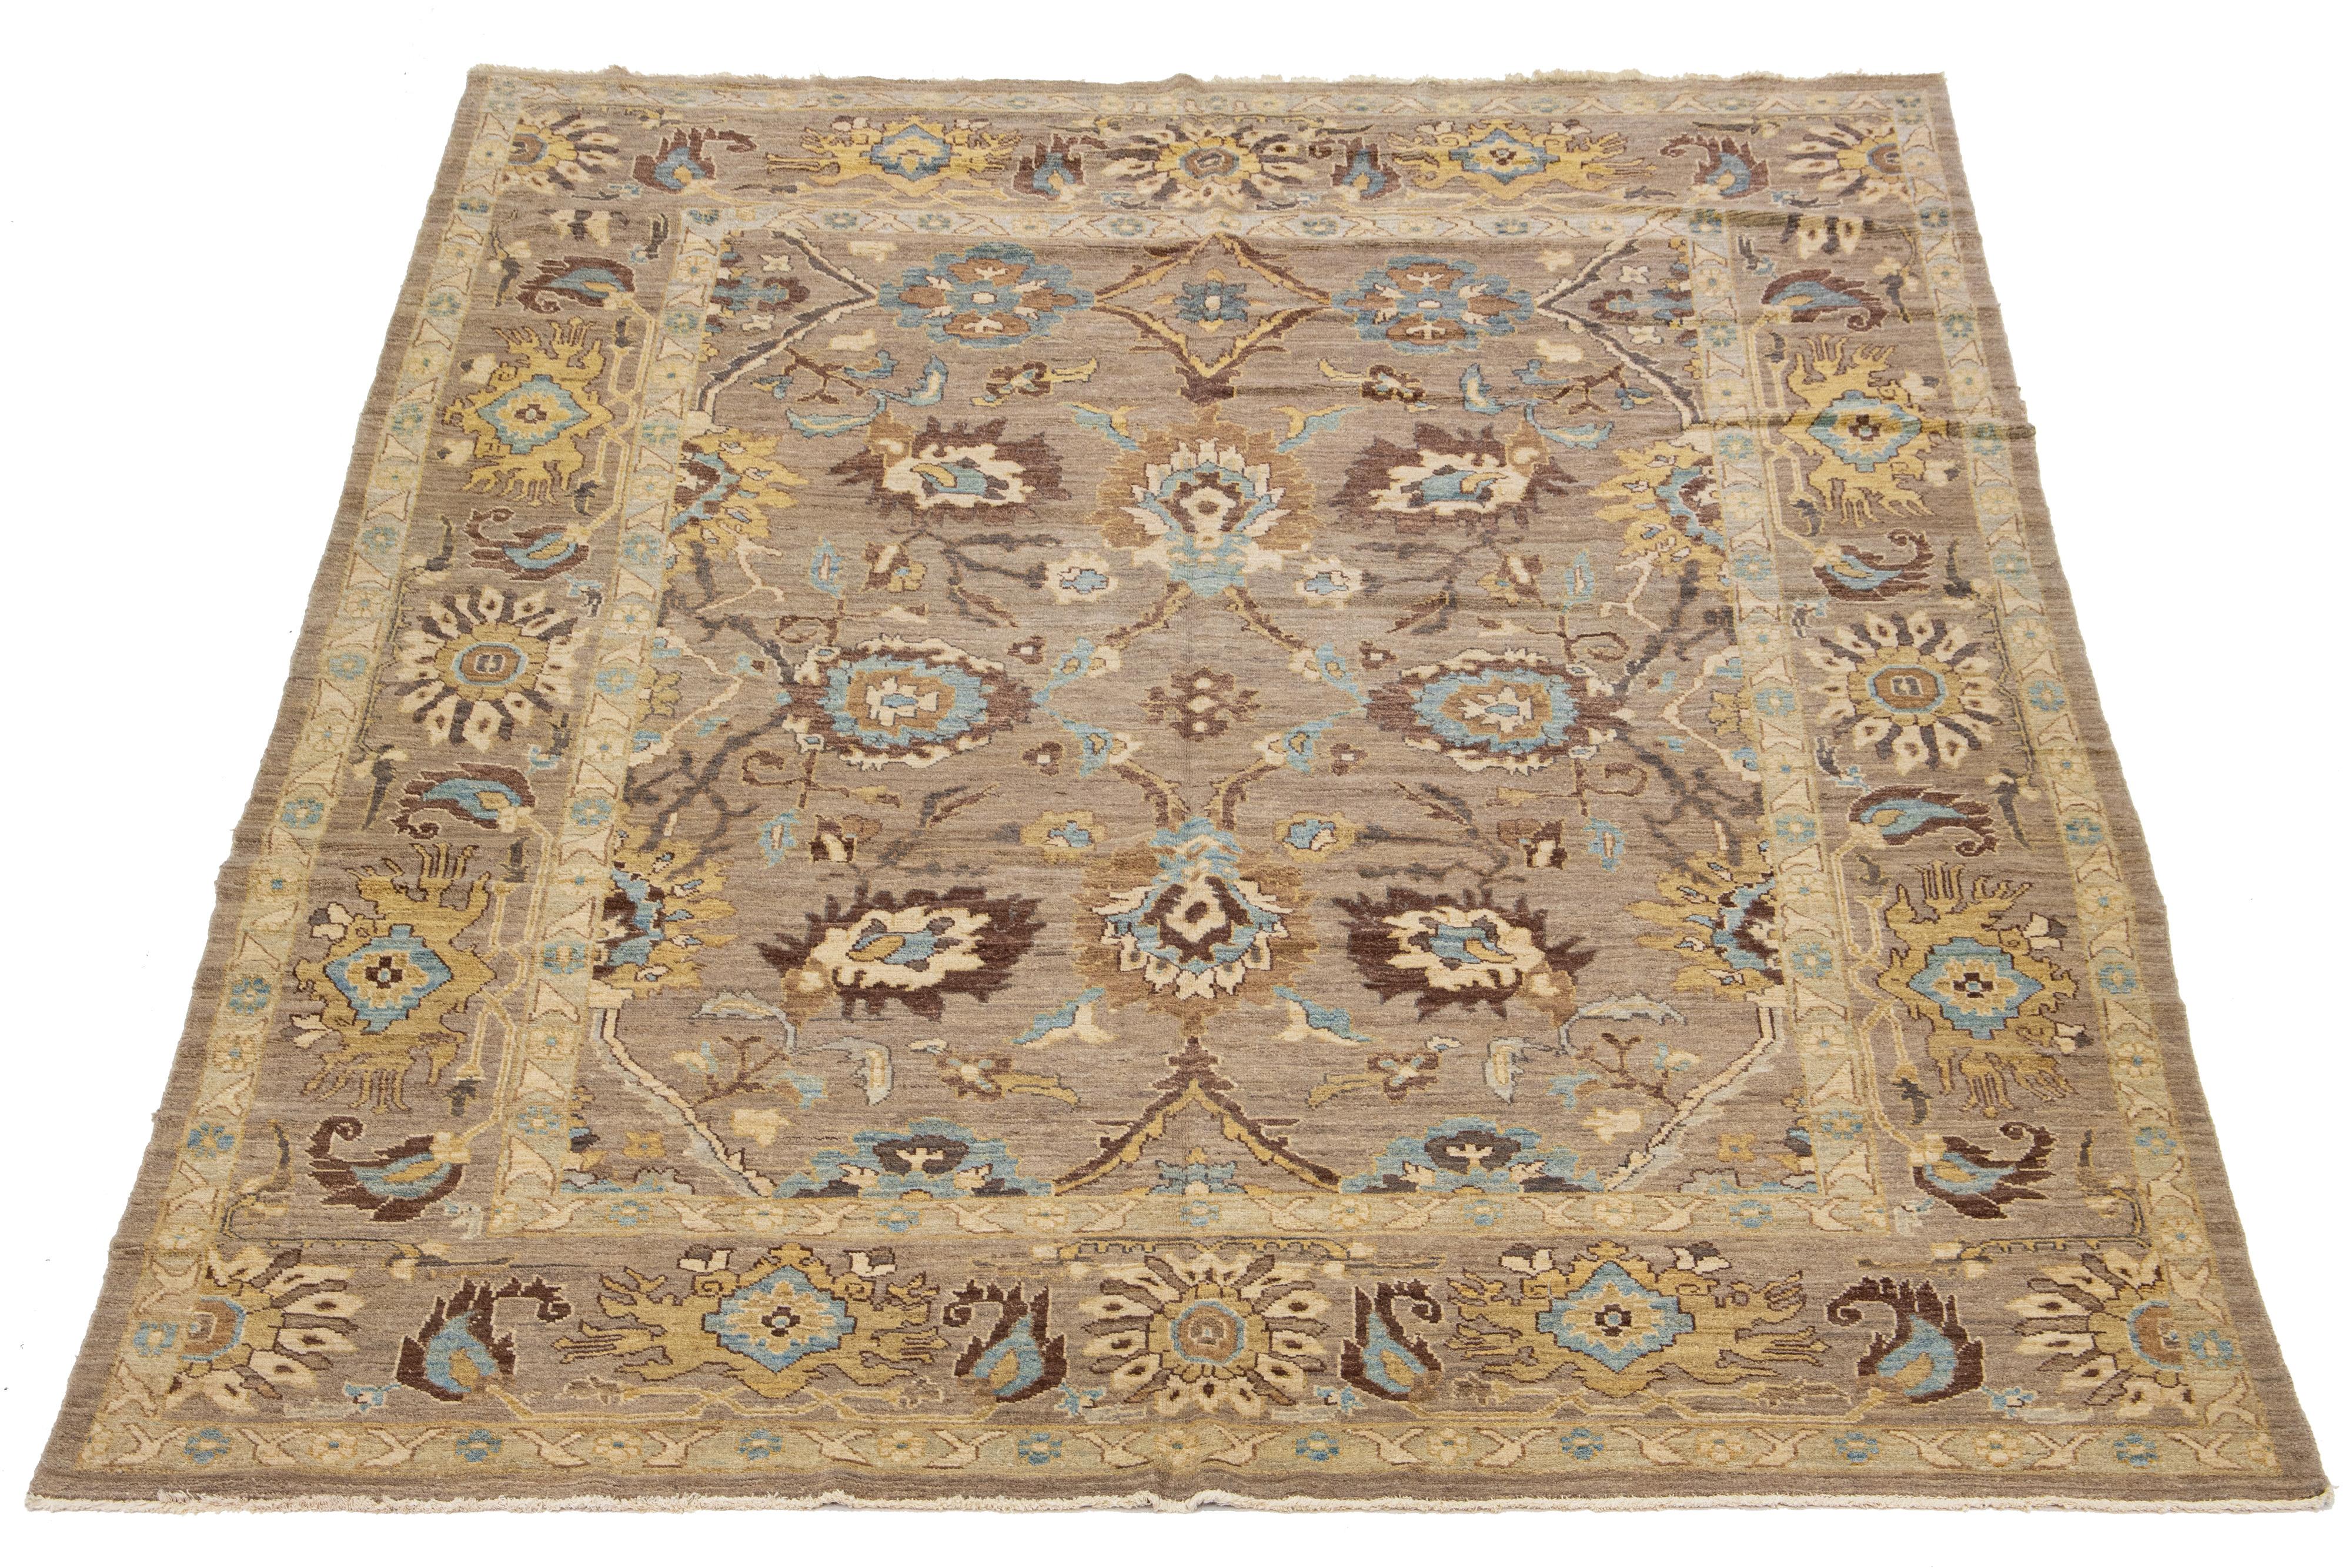 This is a modern Persian Sultanabad rug with a brown field, a wide border, and an all-over light blue and yellow pattern.

This rug Measures 9'9'' x 12'8''.